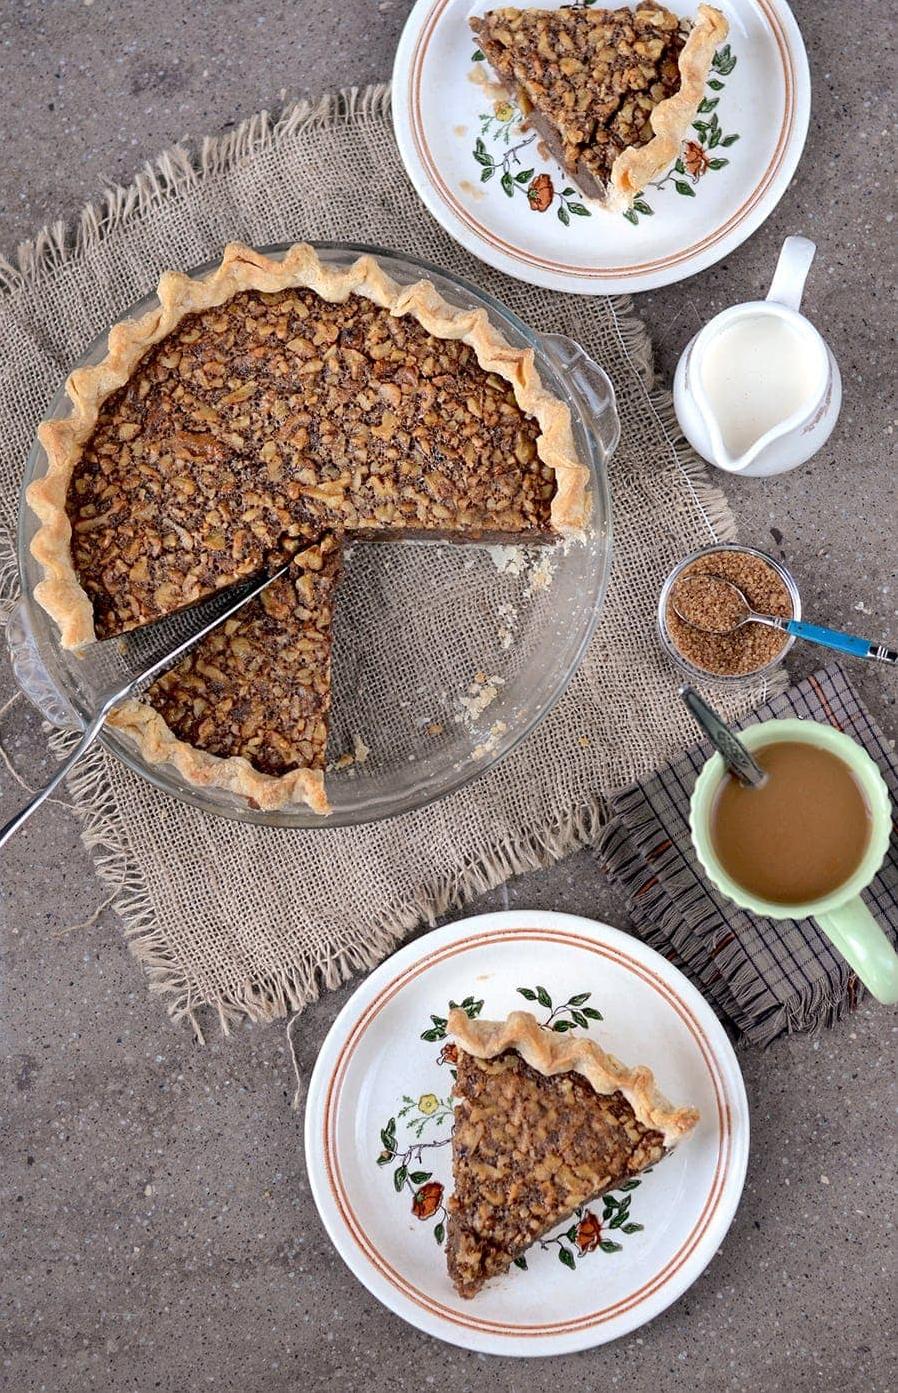  The aroma of maple syrup will fill your kitchen as you bake this pie.